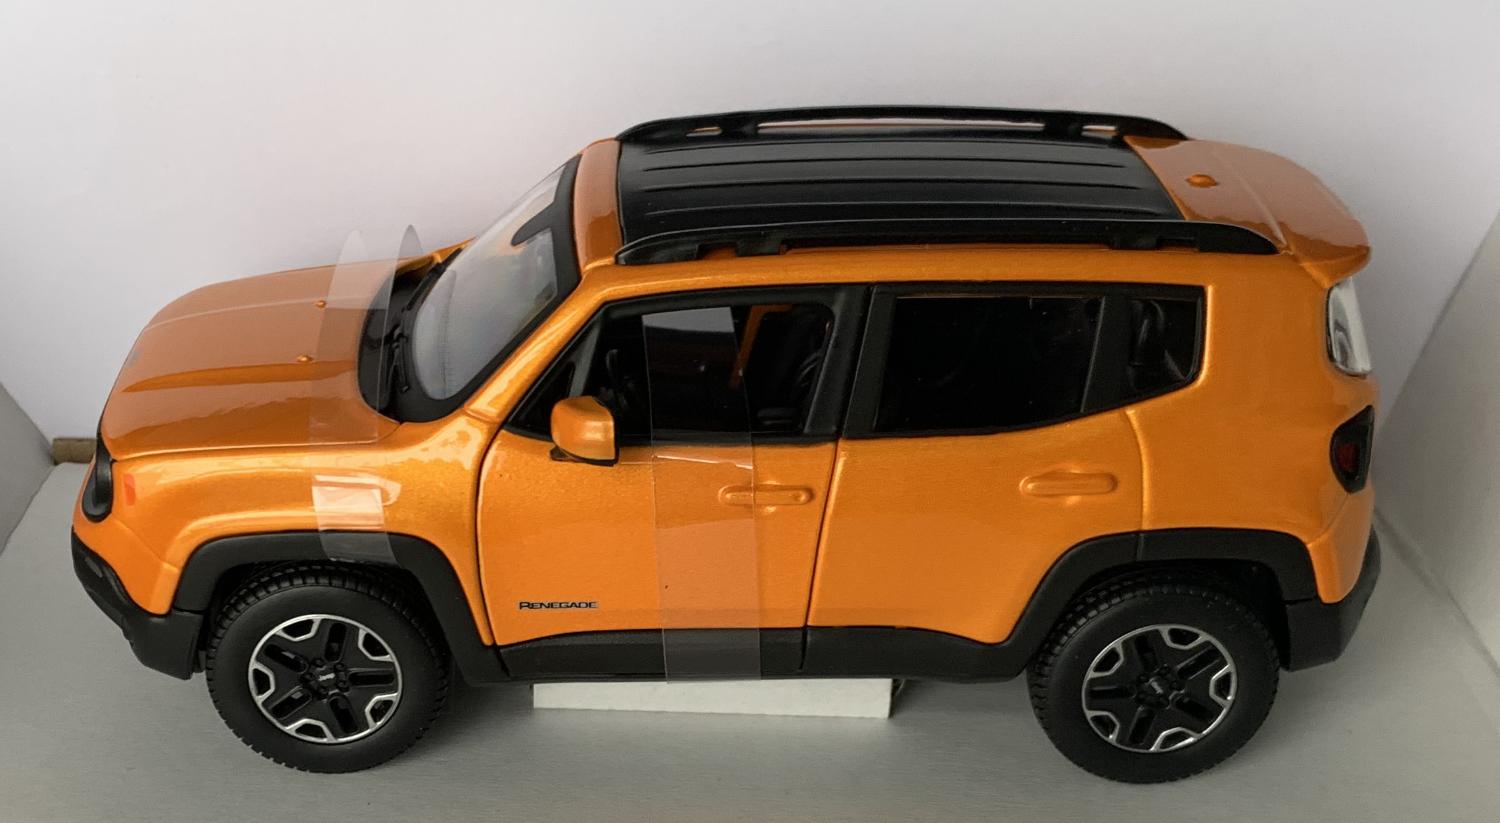 Jeep Renegade in orange 1:24 scale model from Maisto